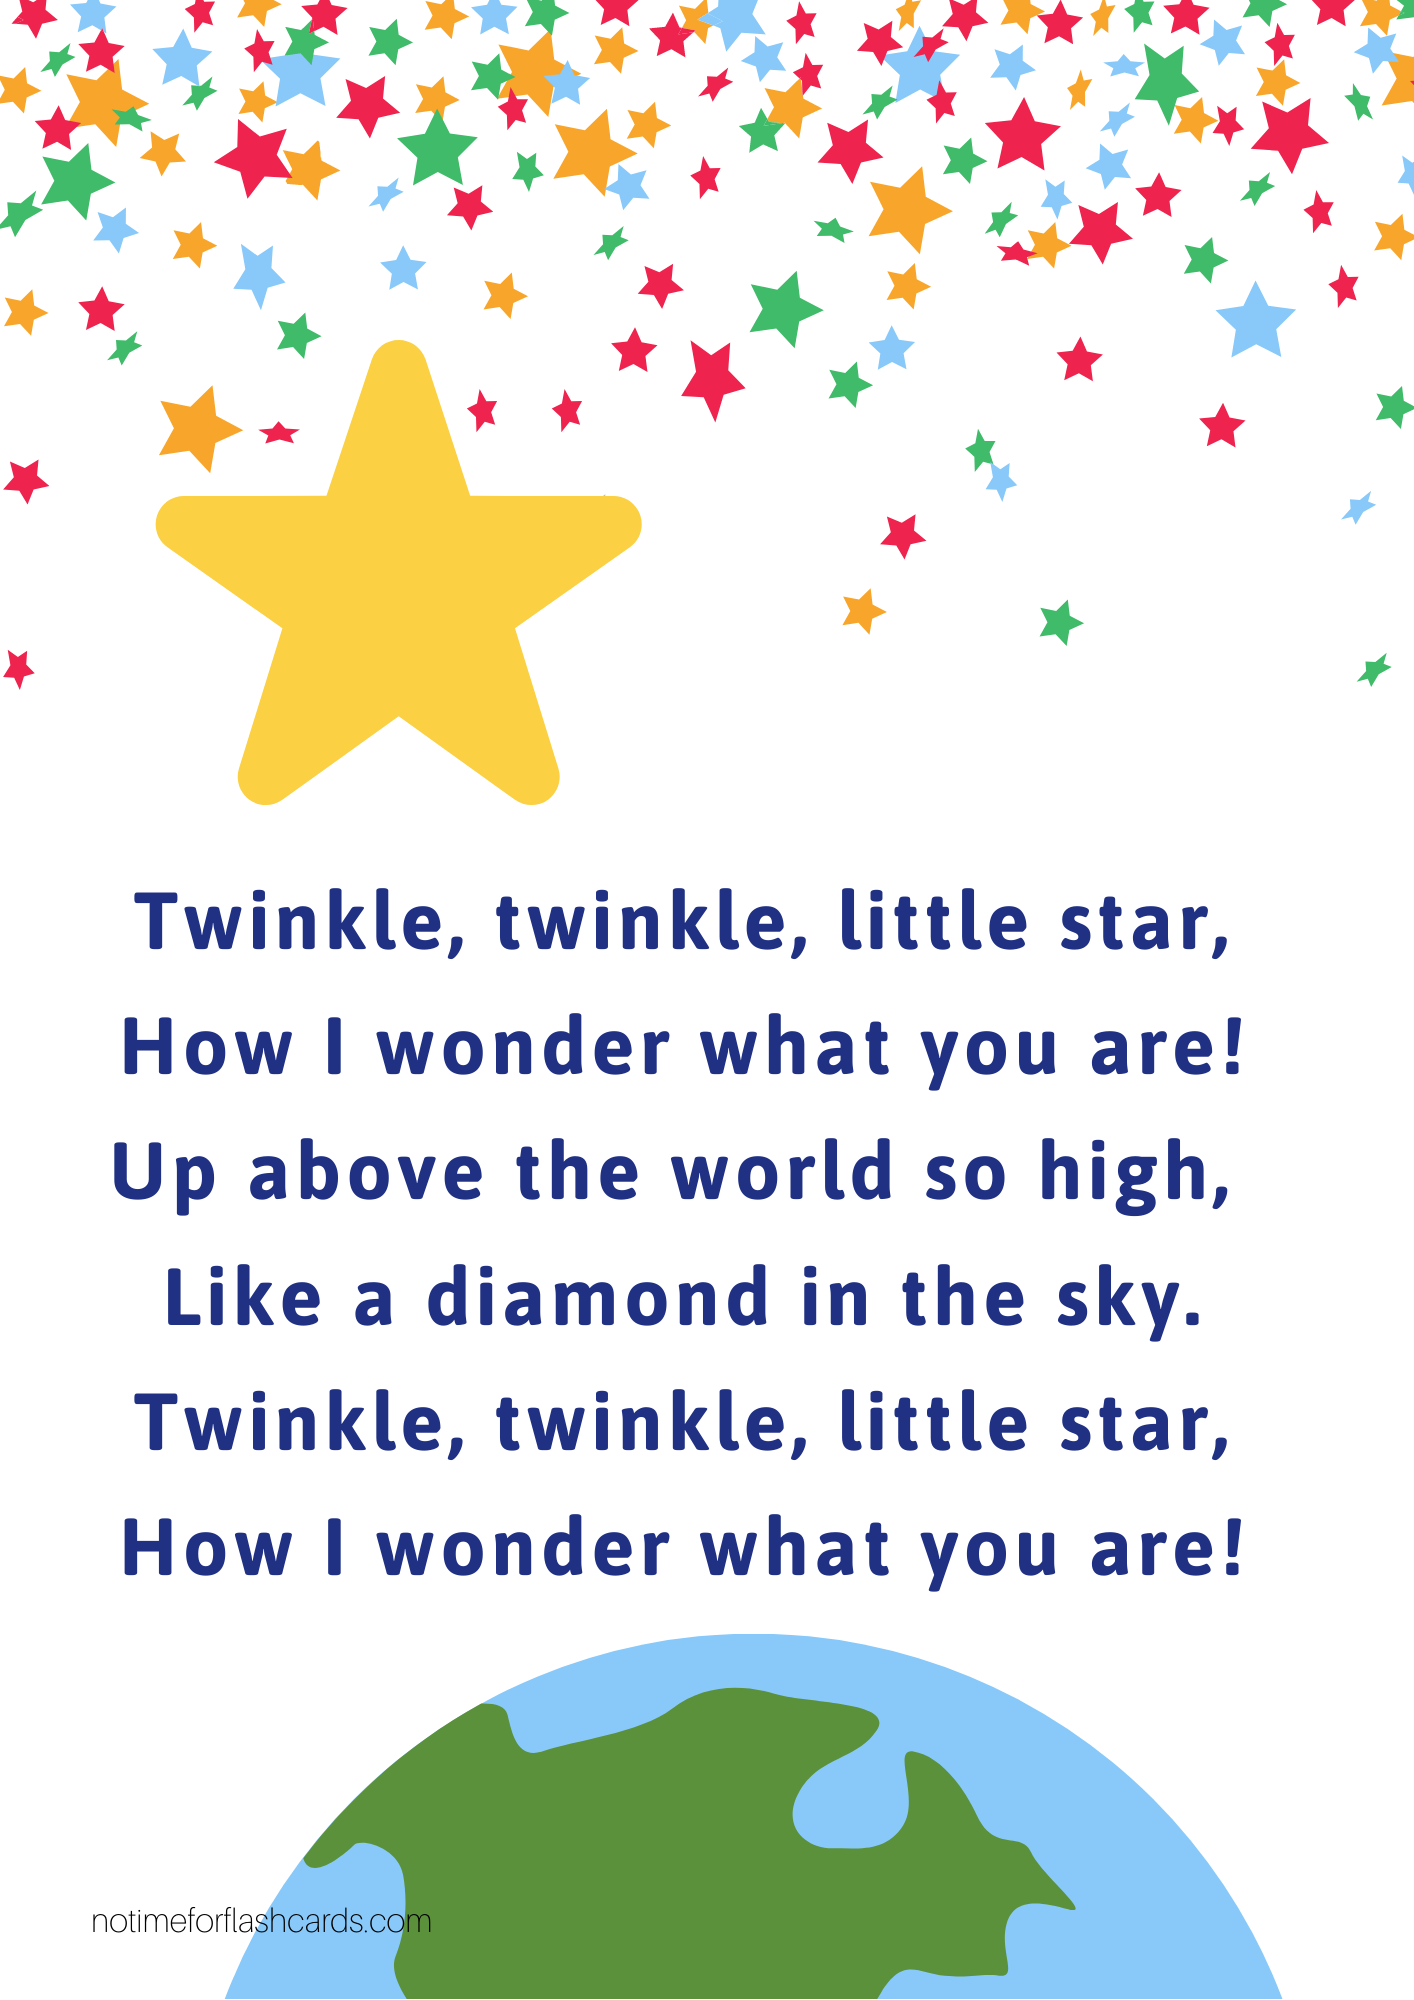 Free Twinkle Twinkle Little Star Printable Sequencing Cards In 2021 - Riset